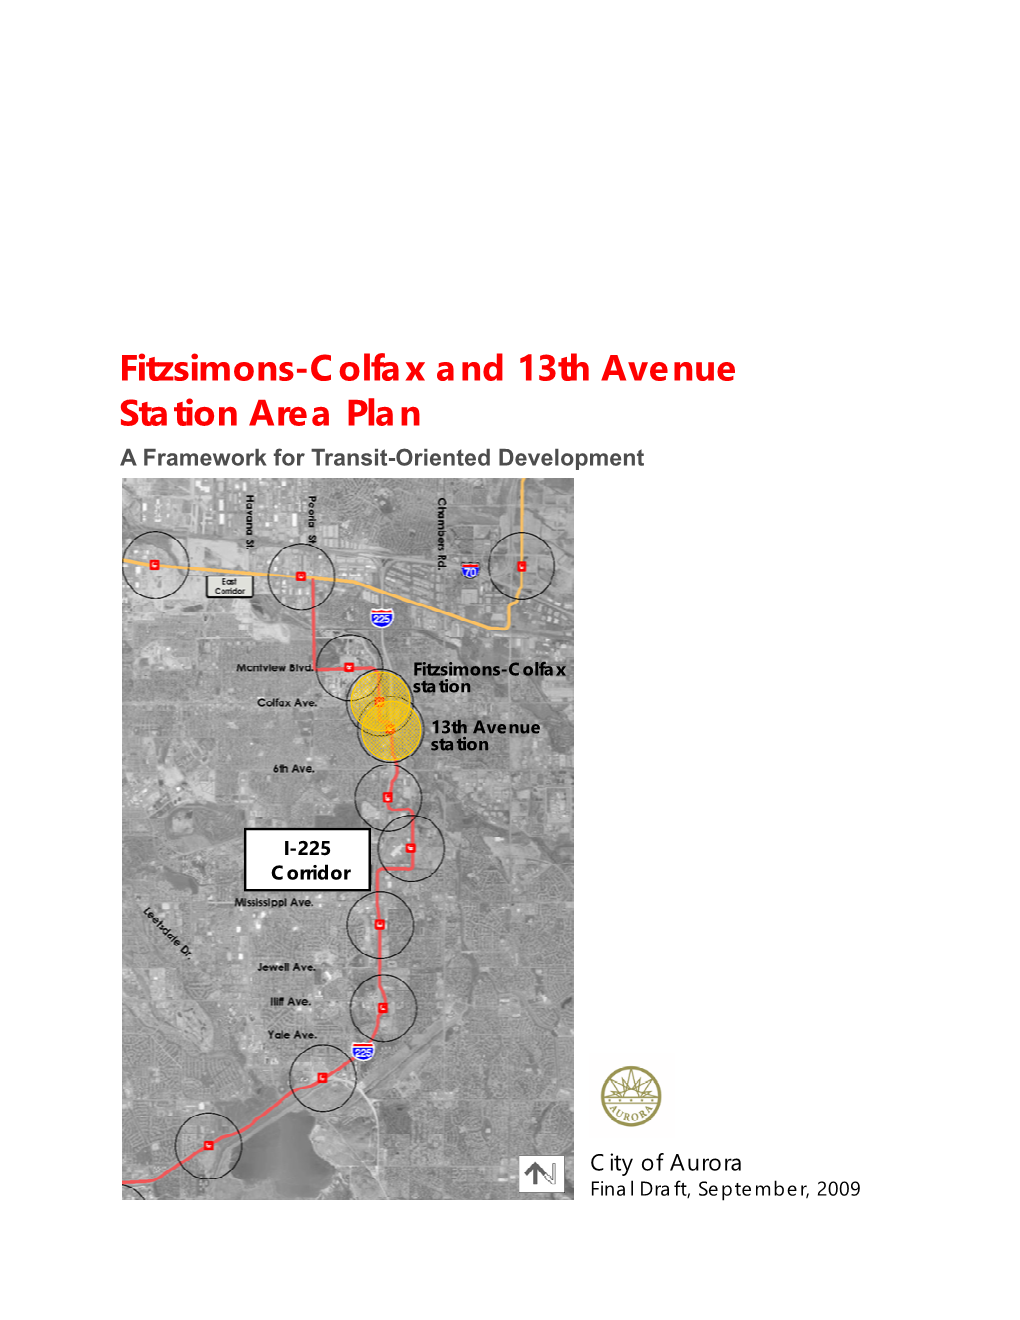 Fitzsimons-Colfax and 13Th Avenue Station Area Plan a Framework for Transit-Oriented Development